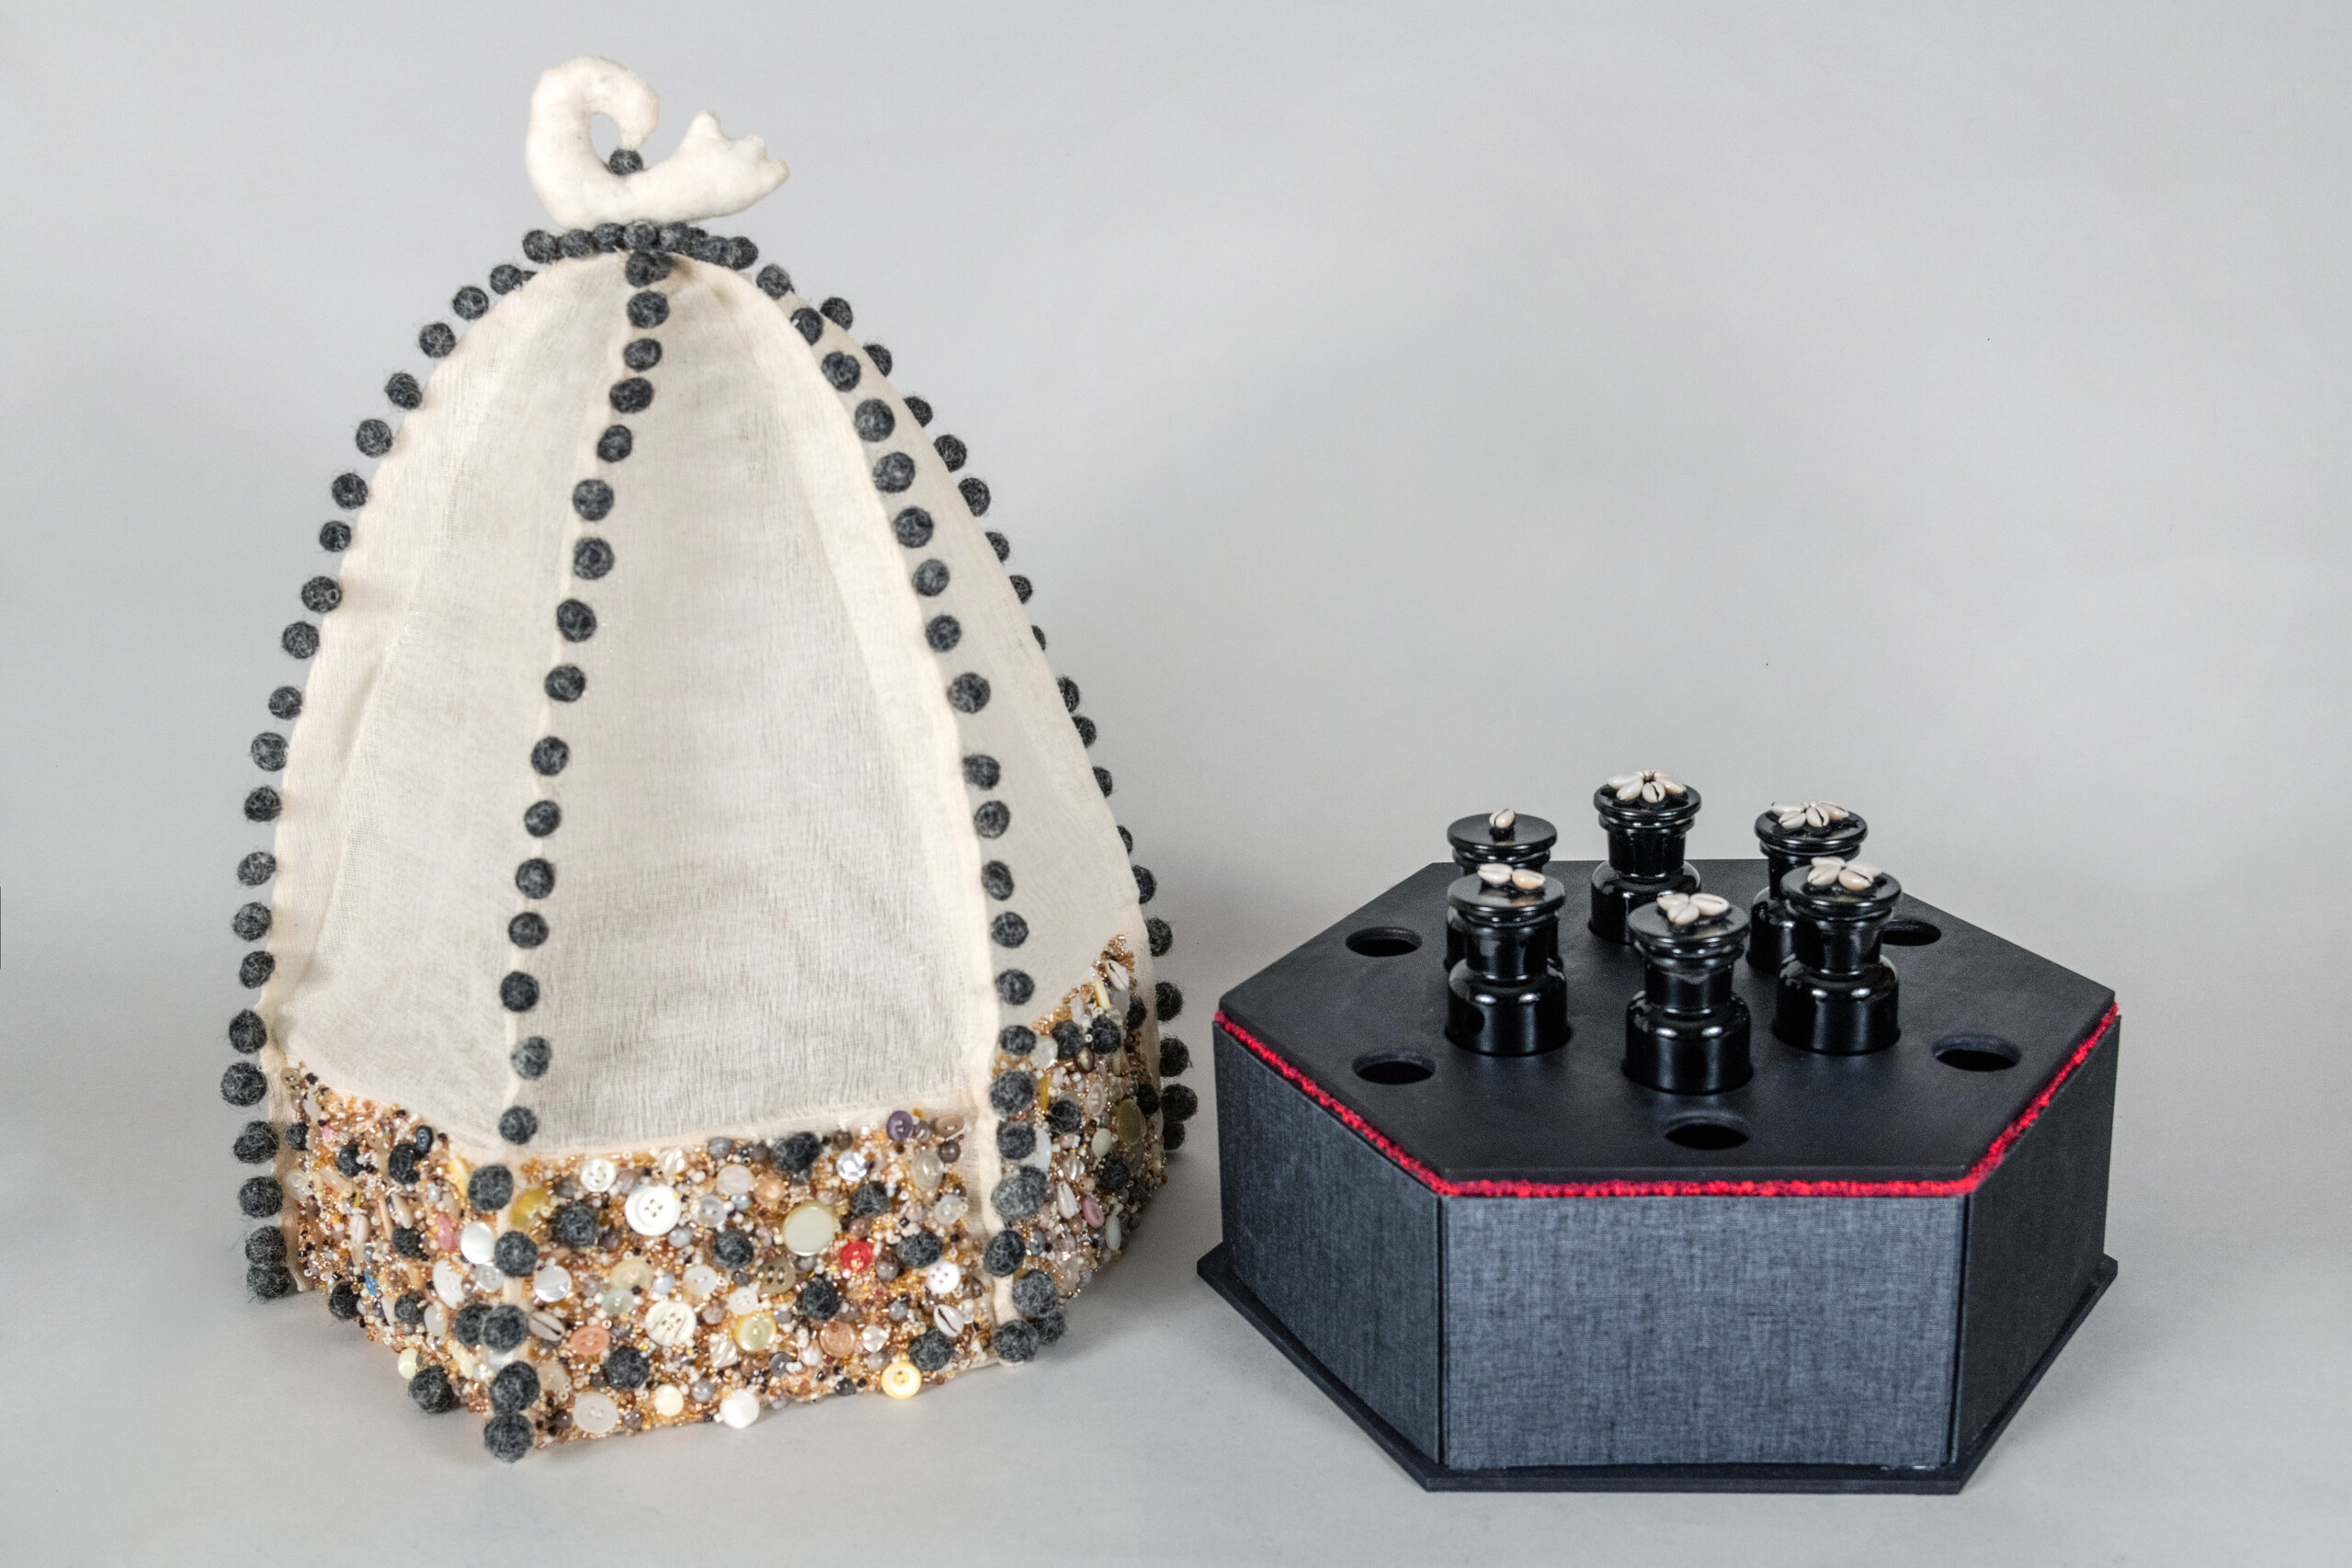 Two parts of an artist's book. One part is a black hexagonal box covered in cowry shells, small black bottles, and red beads. The other part is made of white fabric and covered in balls of human hair, buttons, and beads.